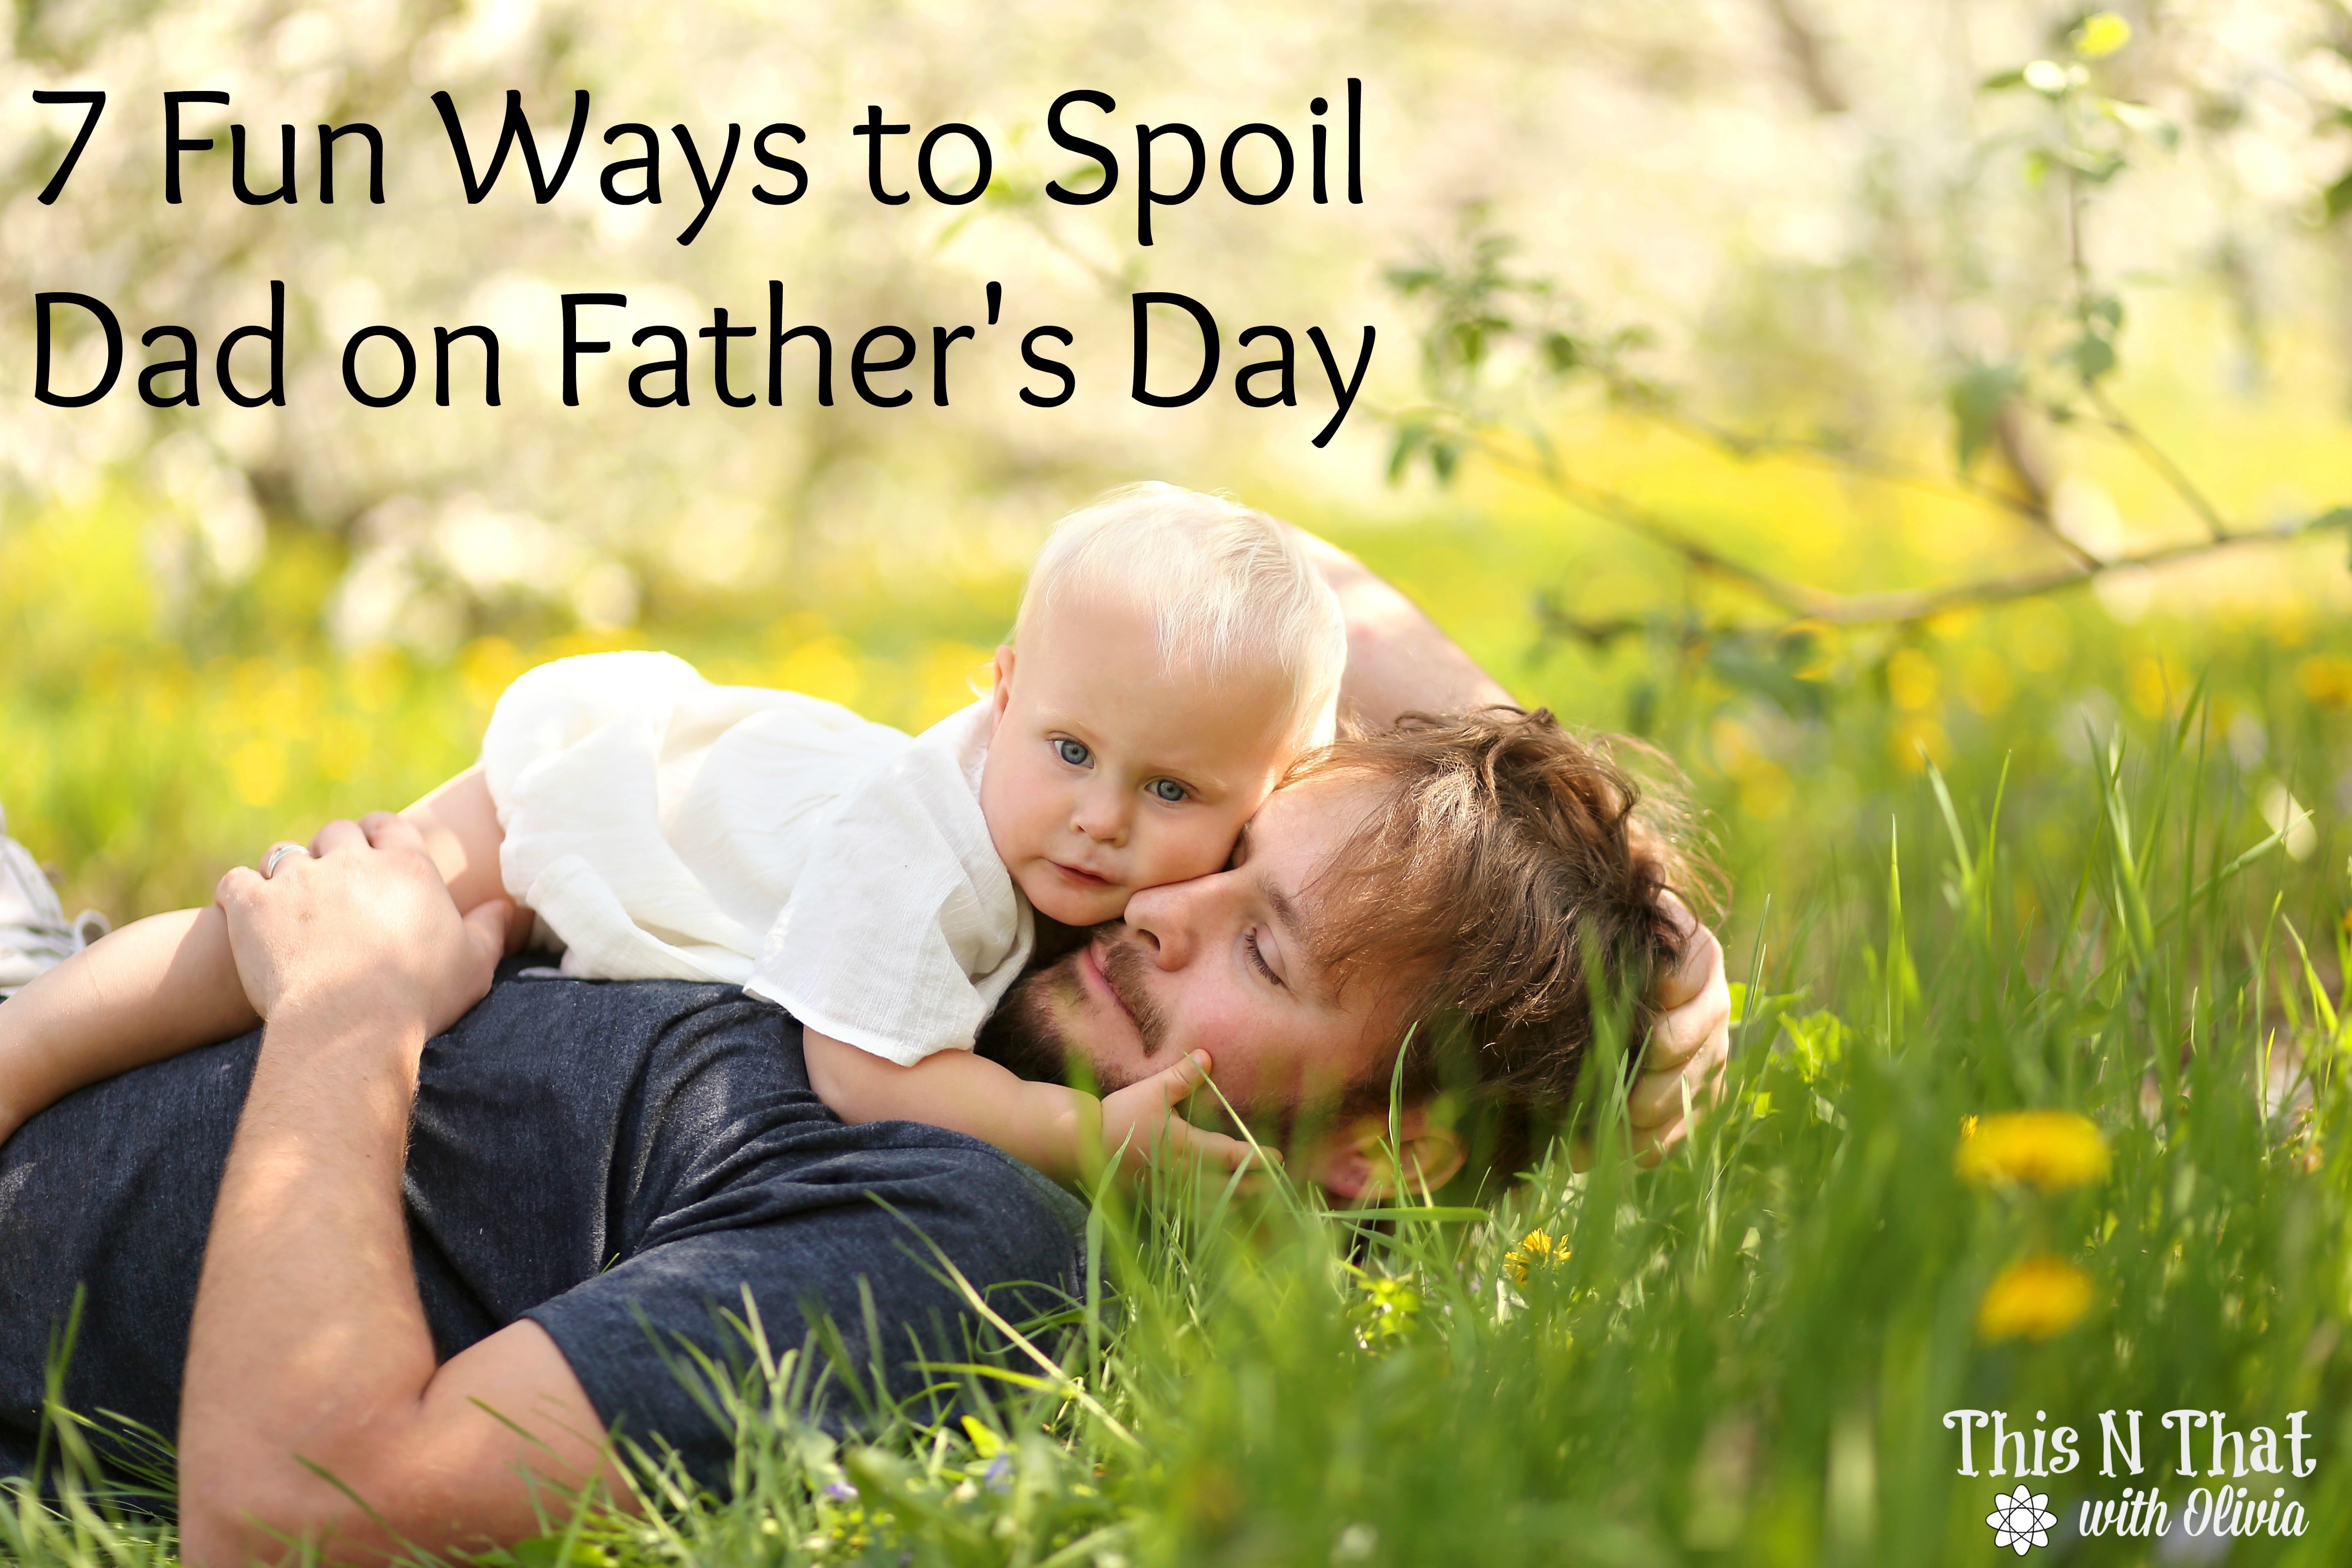 7 Fun Ways to Spoil Dad on Father's Day